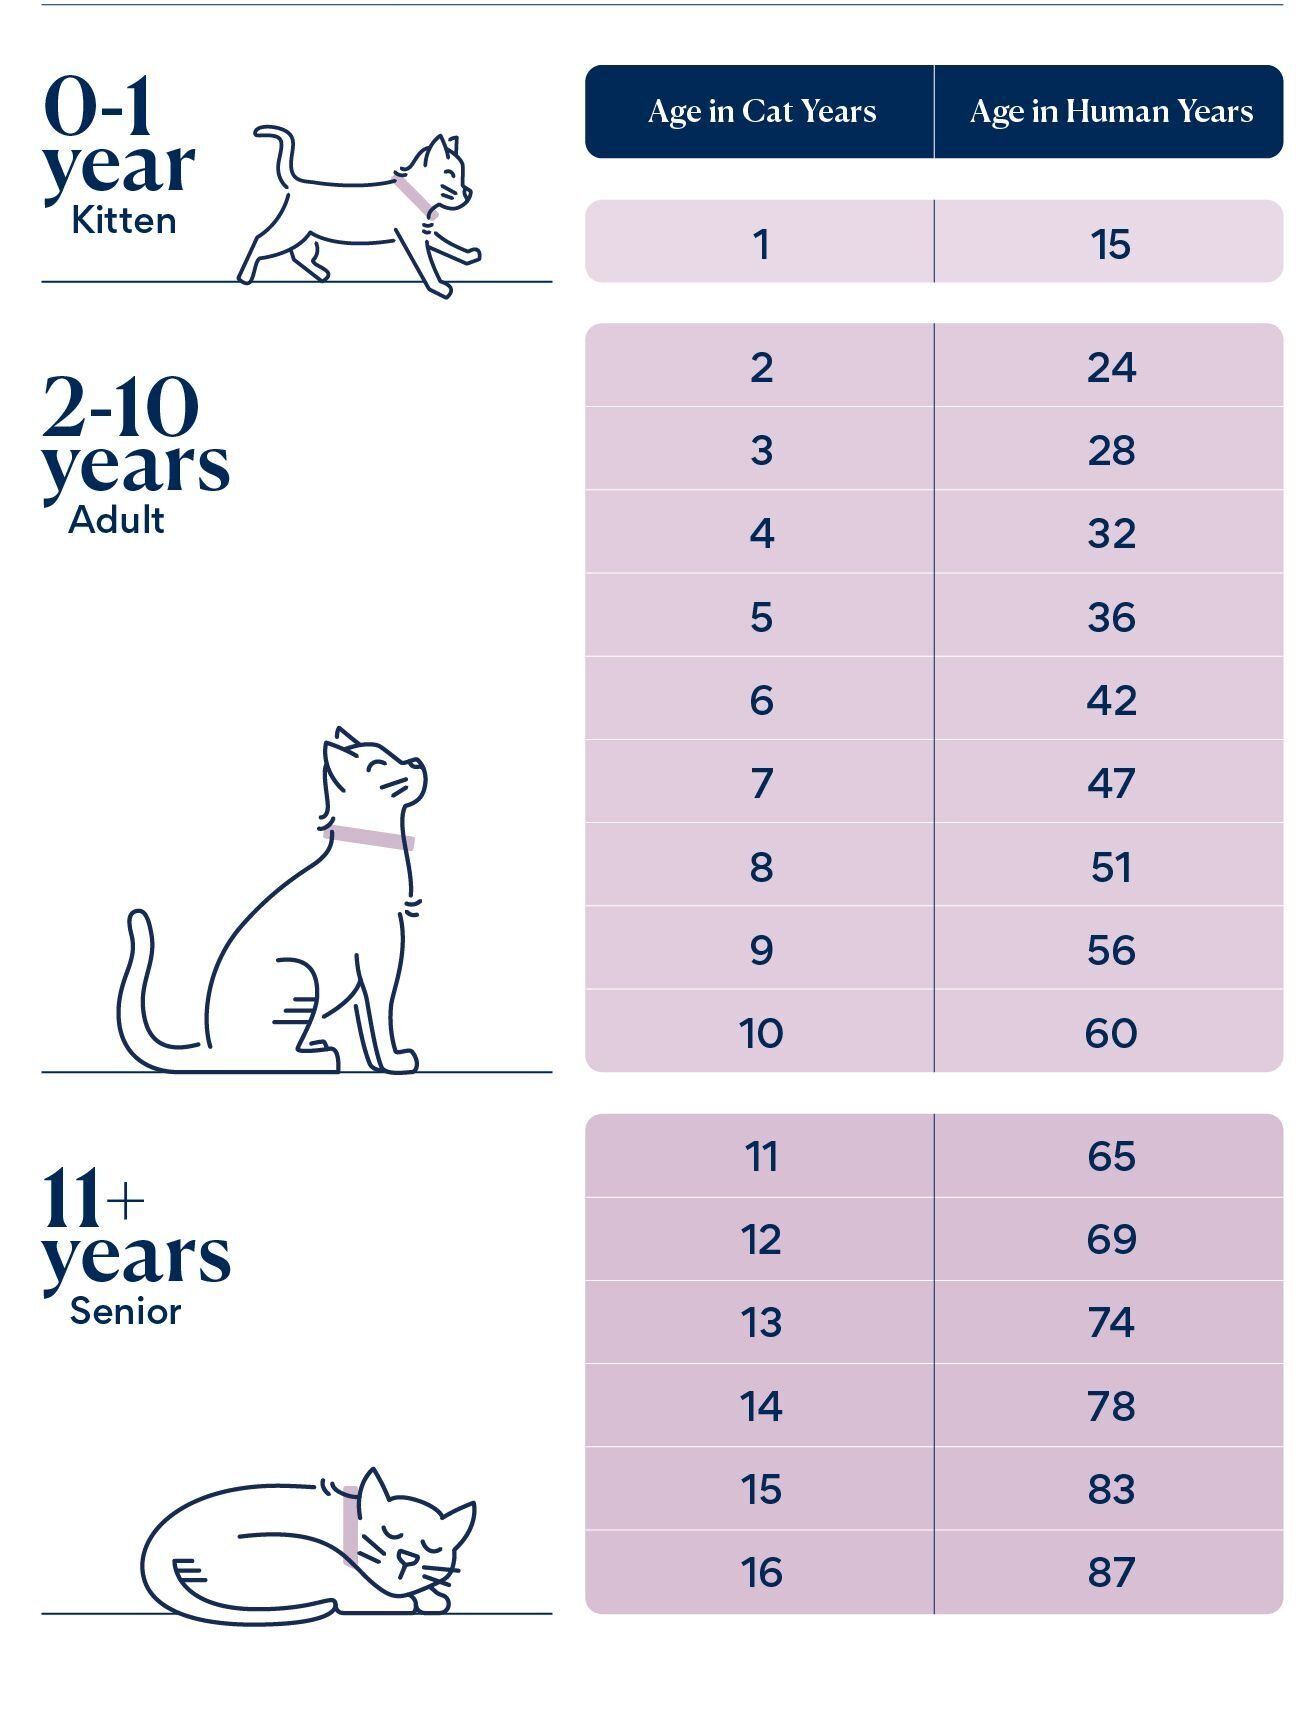 Convert Your Cat's Age to Human Years